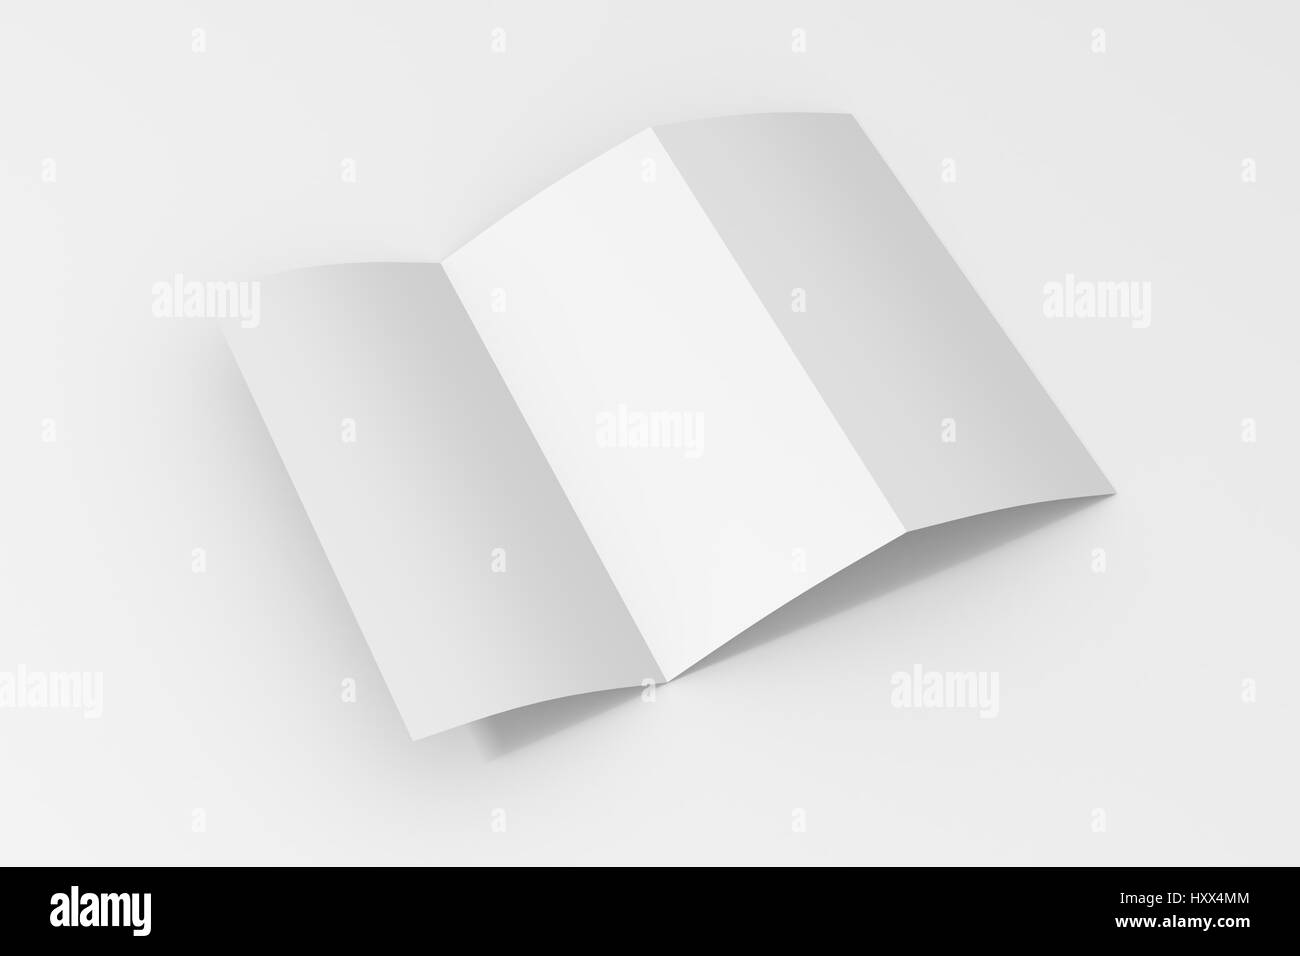 Blank trifold paper brochure on white background with soft shadows and highlights Stock Photo